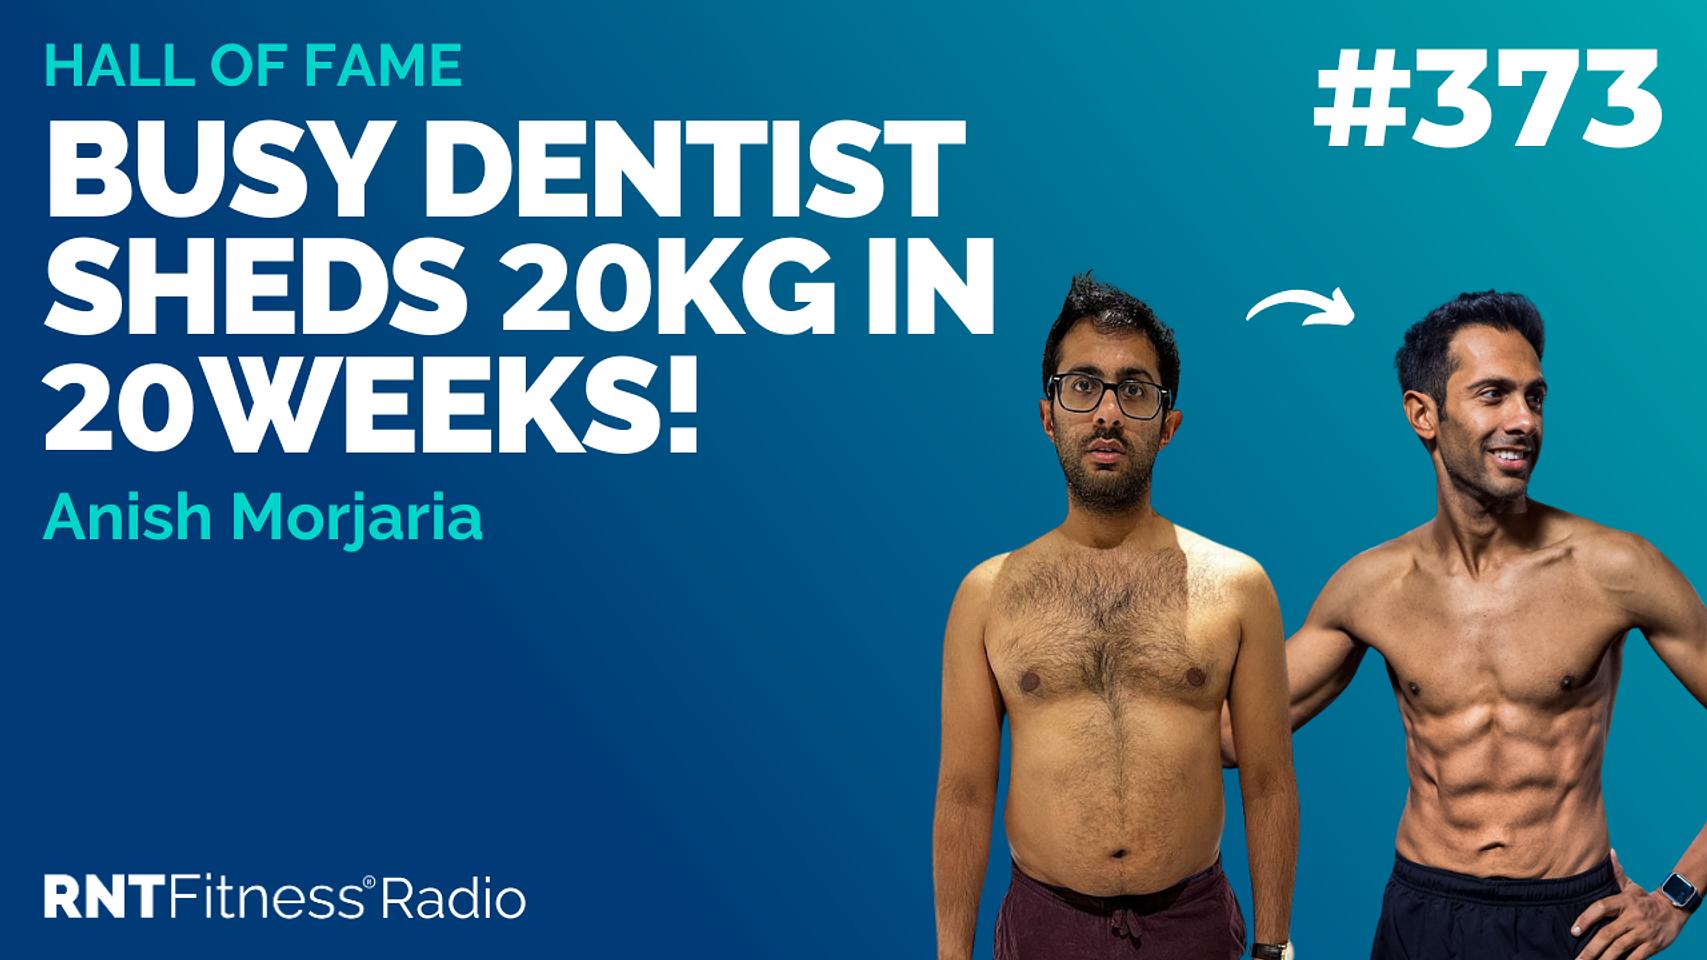 Ep 373 - Hall Of Fame | Anish Morjaria: Busy Dentist Sheds 20kg In 20 Weeks!